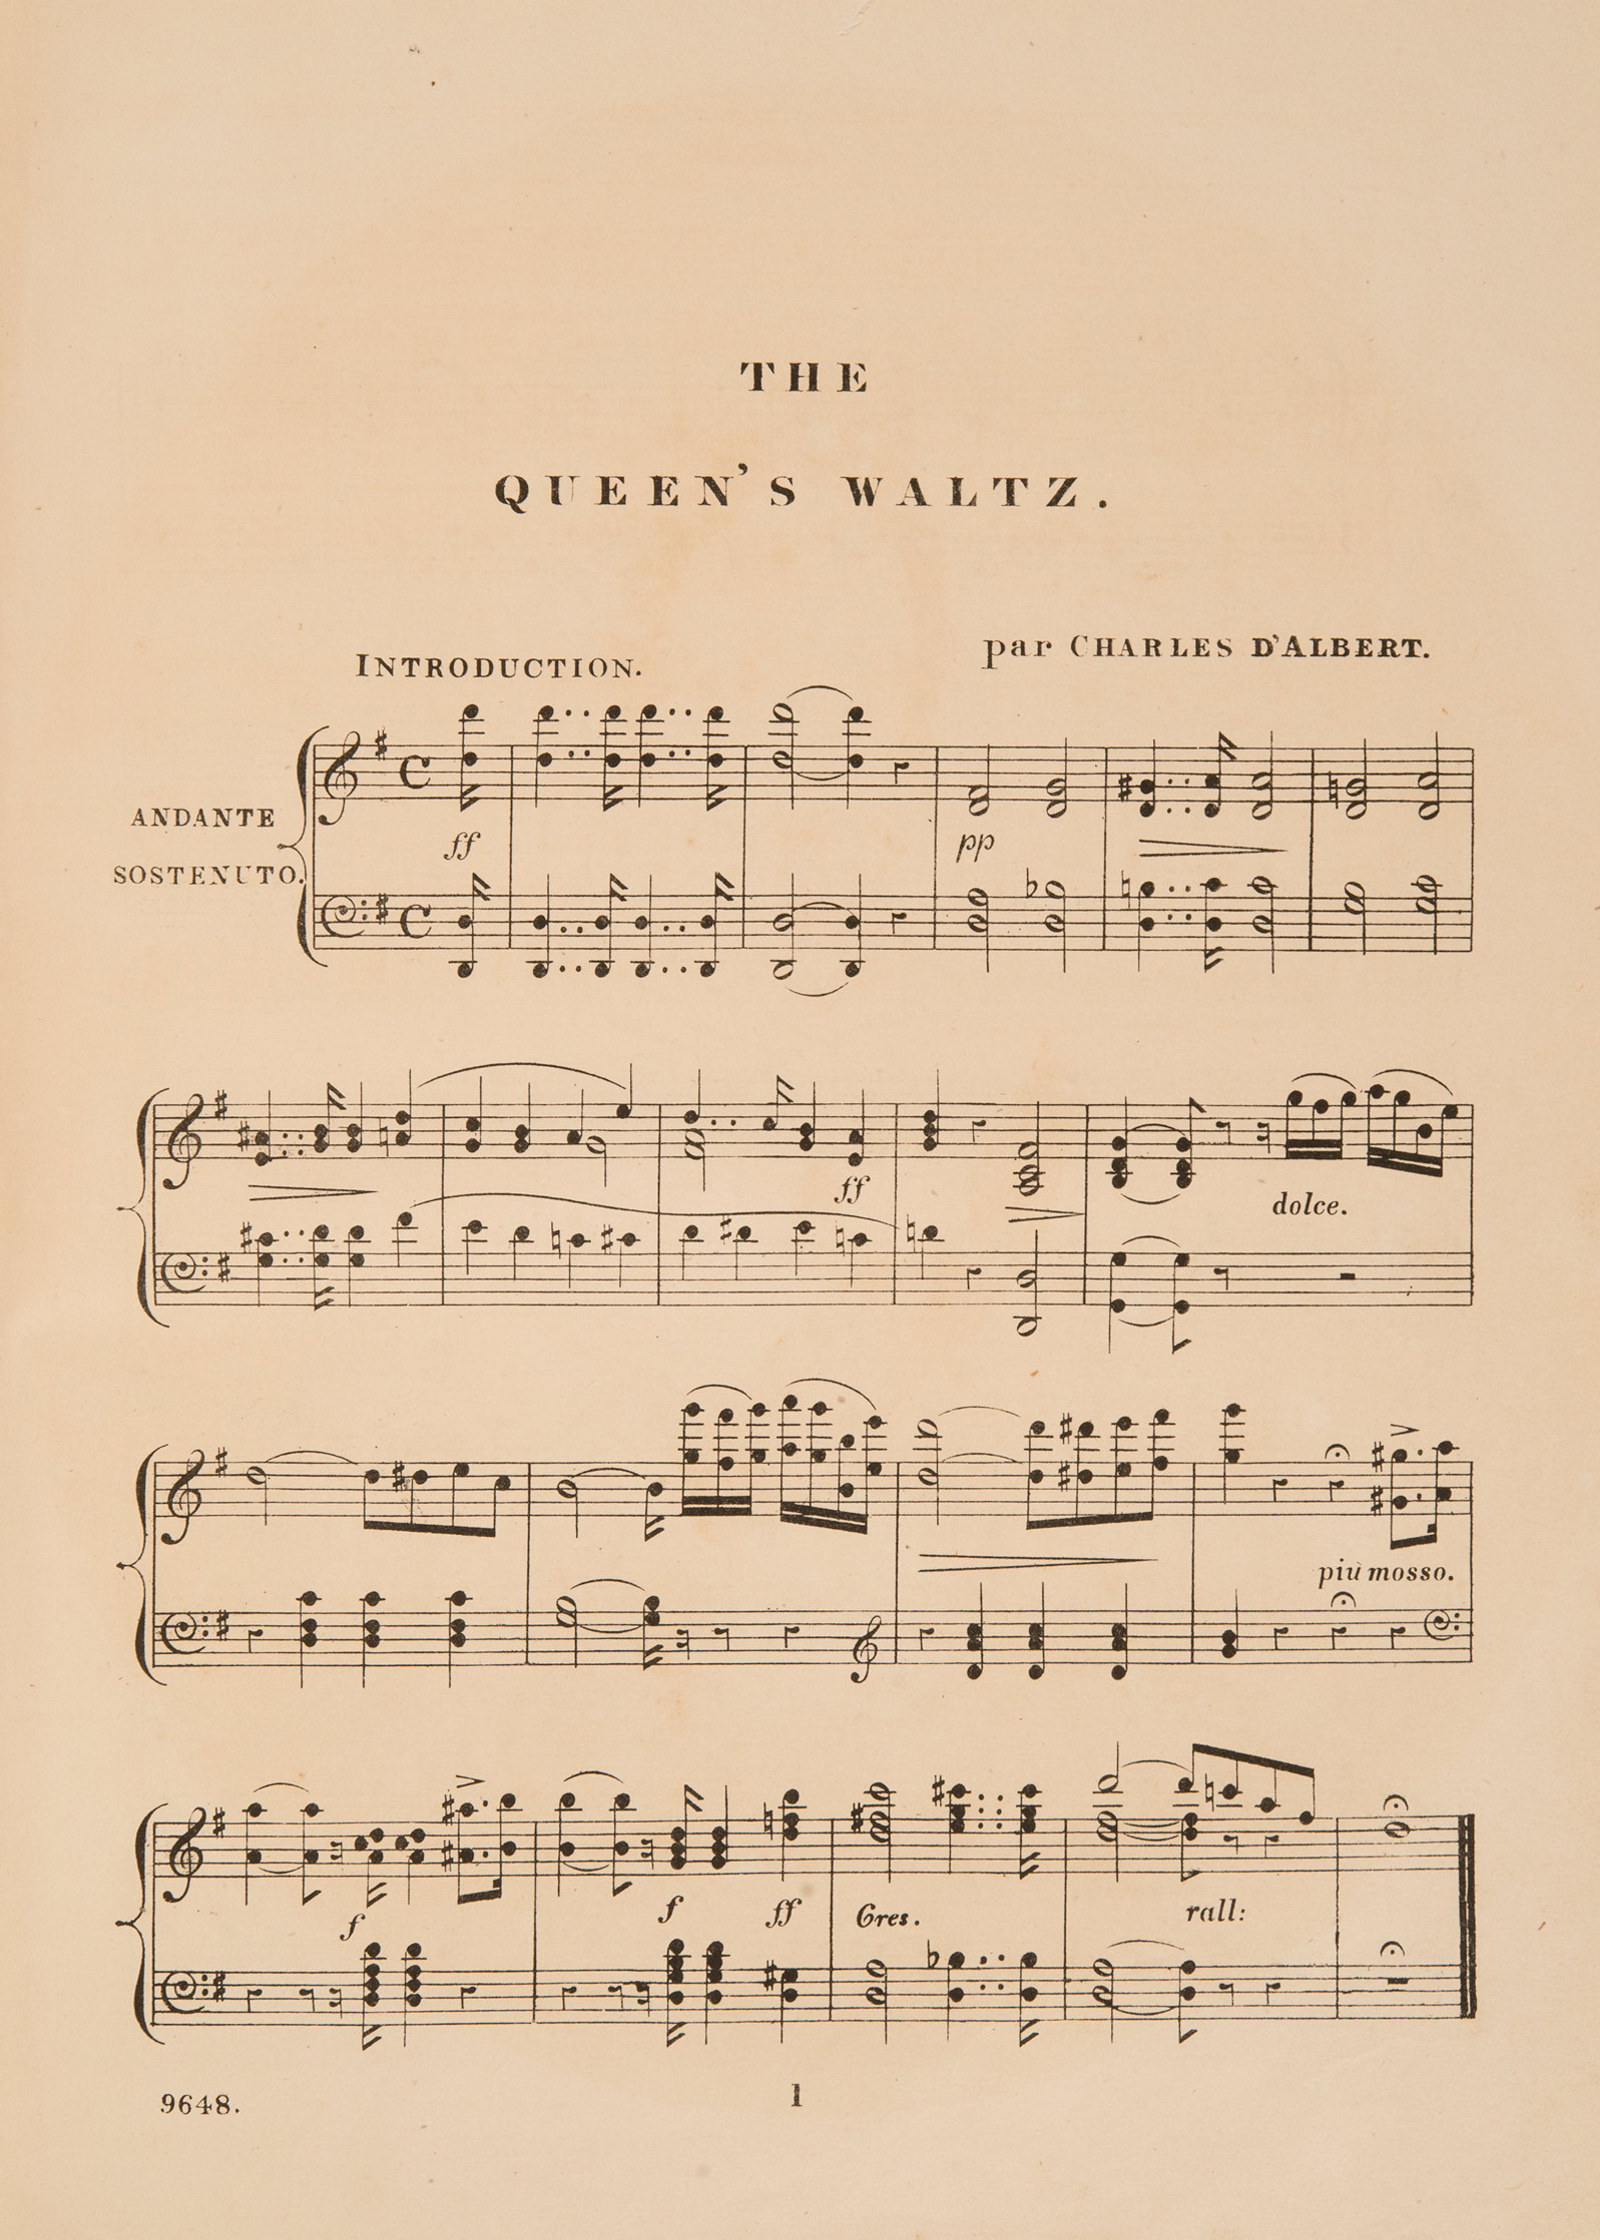 Sheet music, 'The Queen's Waltz', by Charles D'Albert, page 1, published 1857